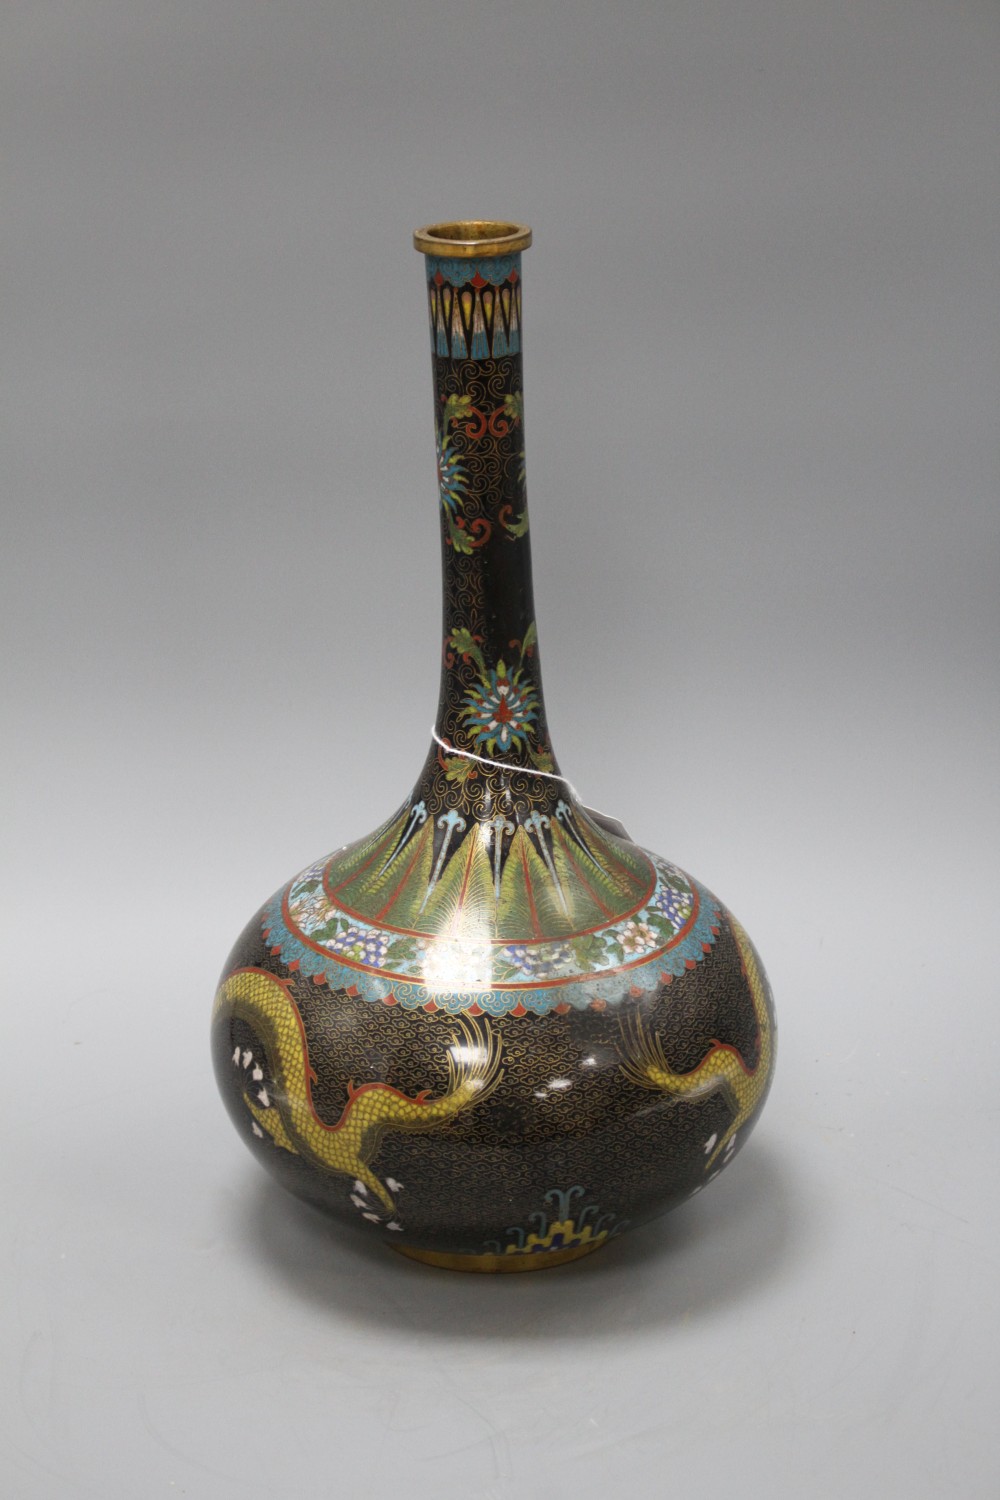 An early 20th century Chinese cloisonne vase, decorated with dragons on a black ground, height 38cm